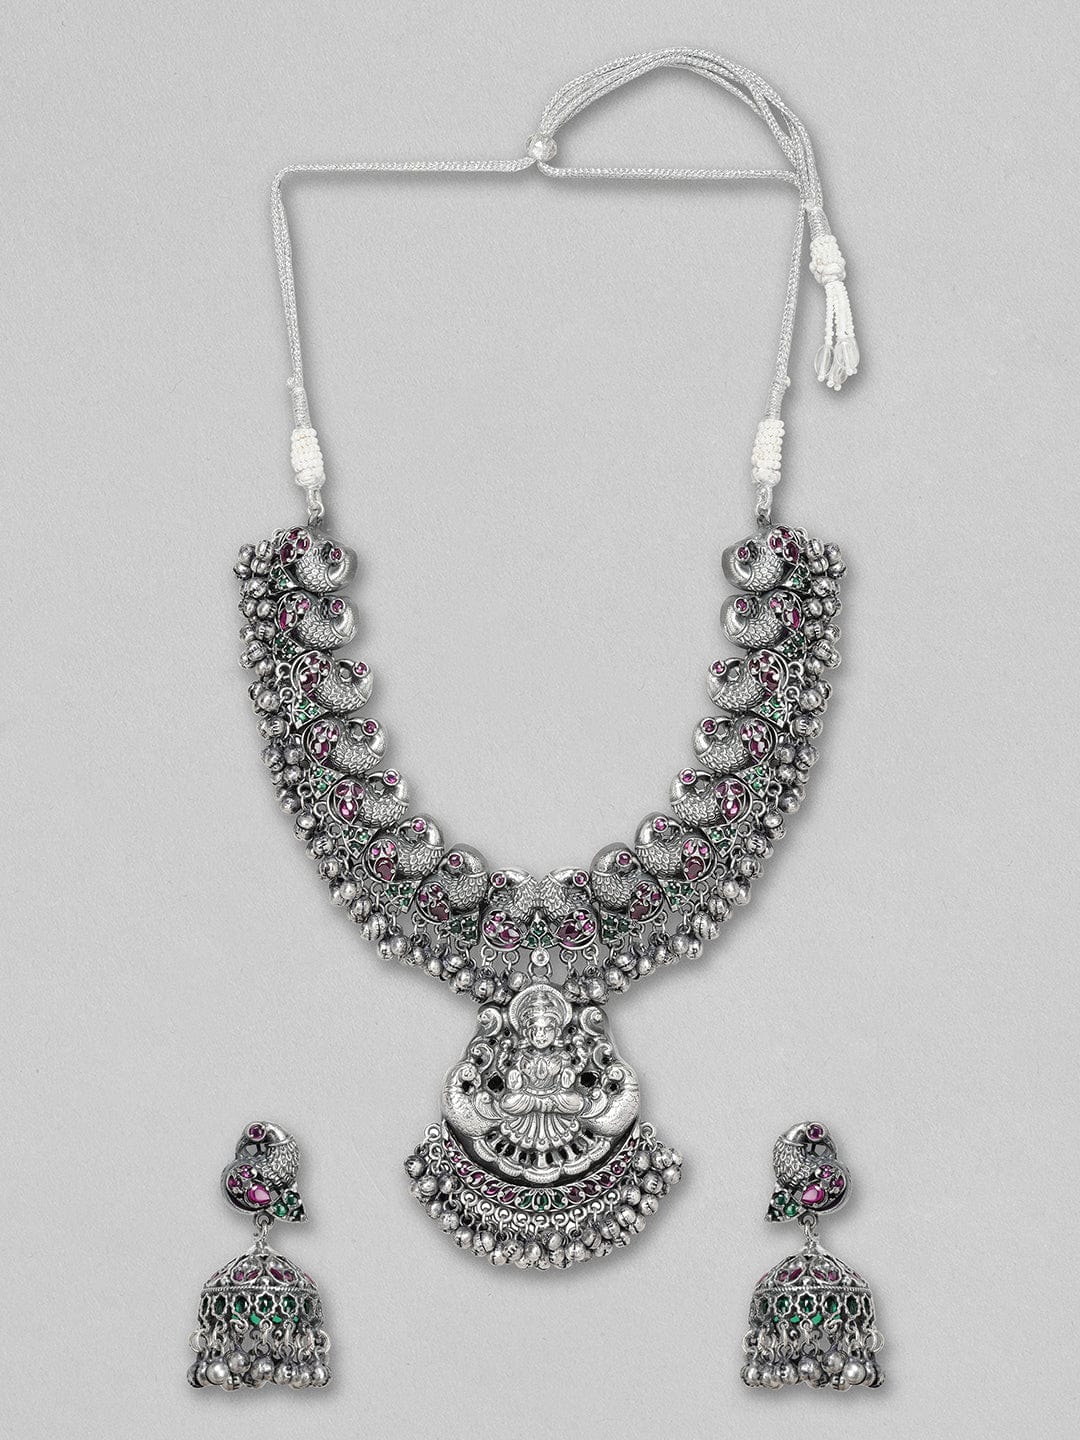 Rubans Silver Oxidised Necklace With God Motif And Elegant Carvings